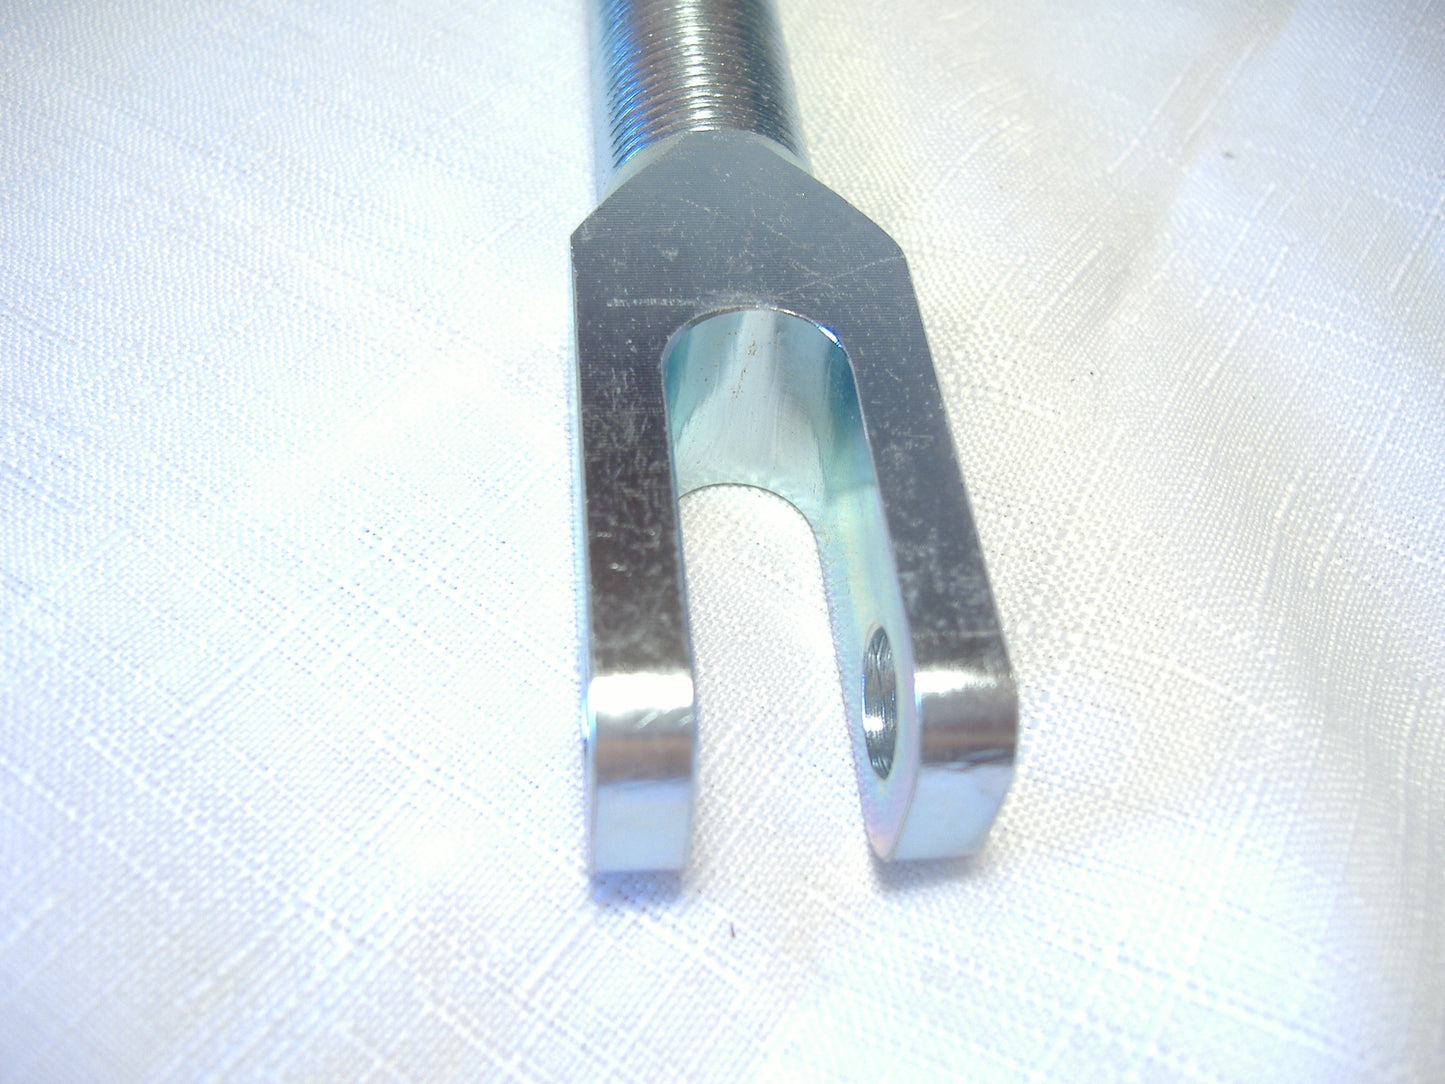 Clevis Bolt for California Sidecar Strut: Reproduction